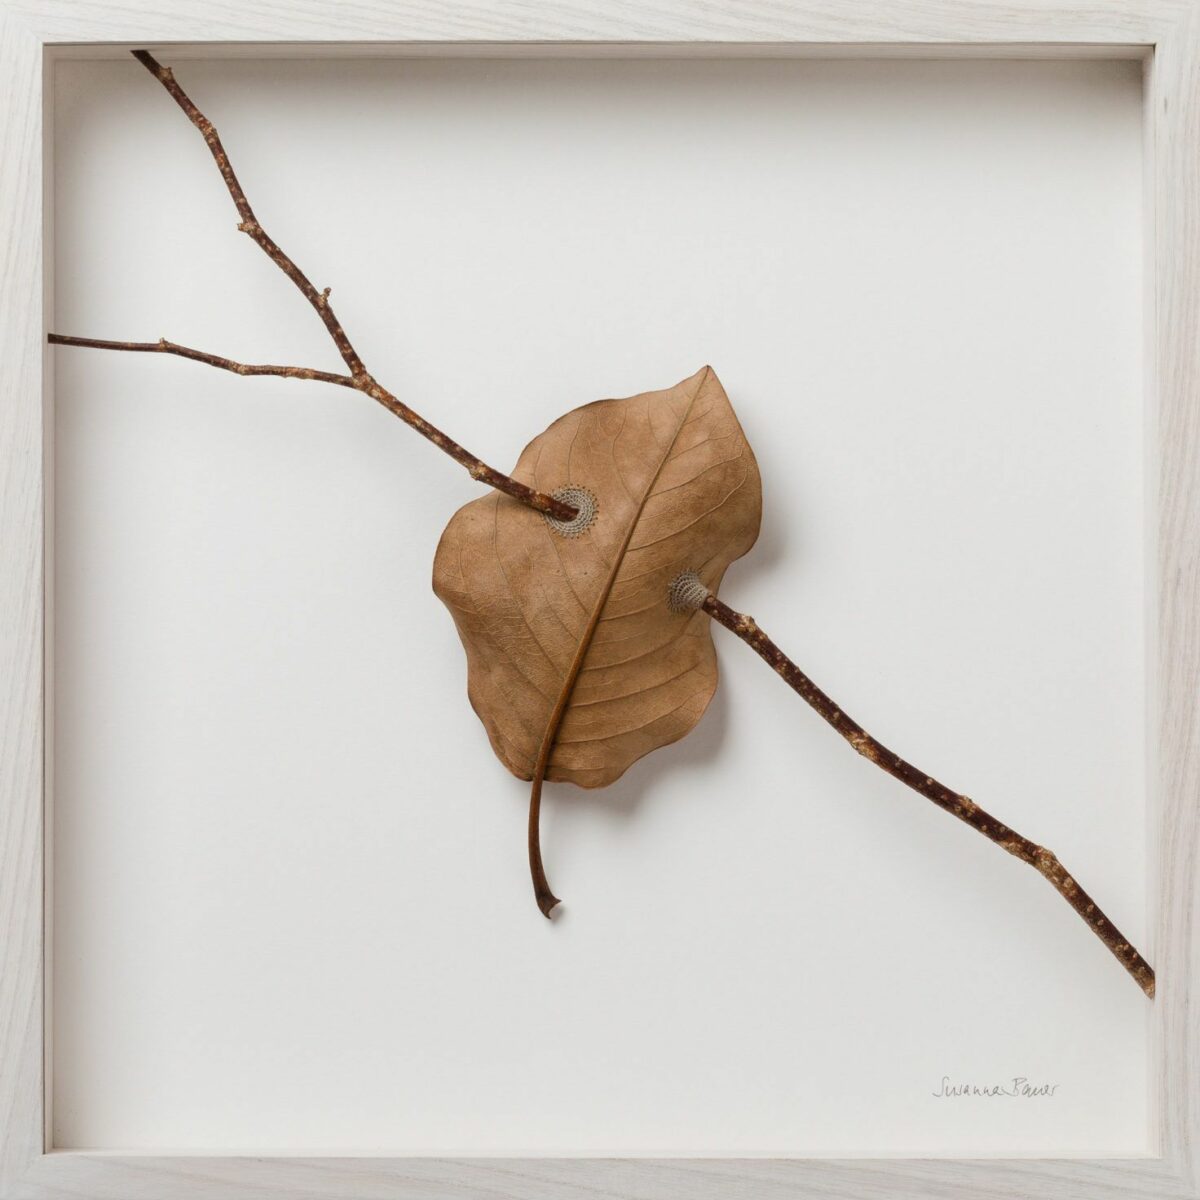 Beautiful Sculptures Of Dried Leaves Crocheted Delicate Patterns By Susanna Bauer 28